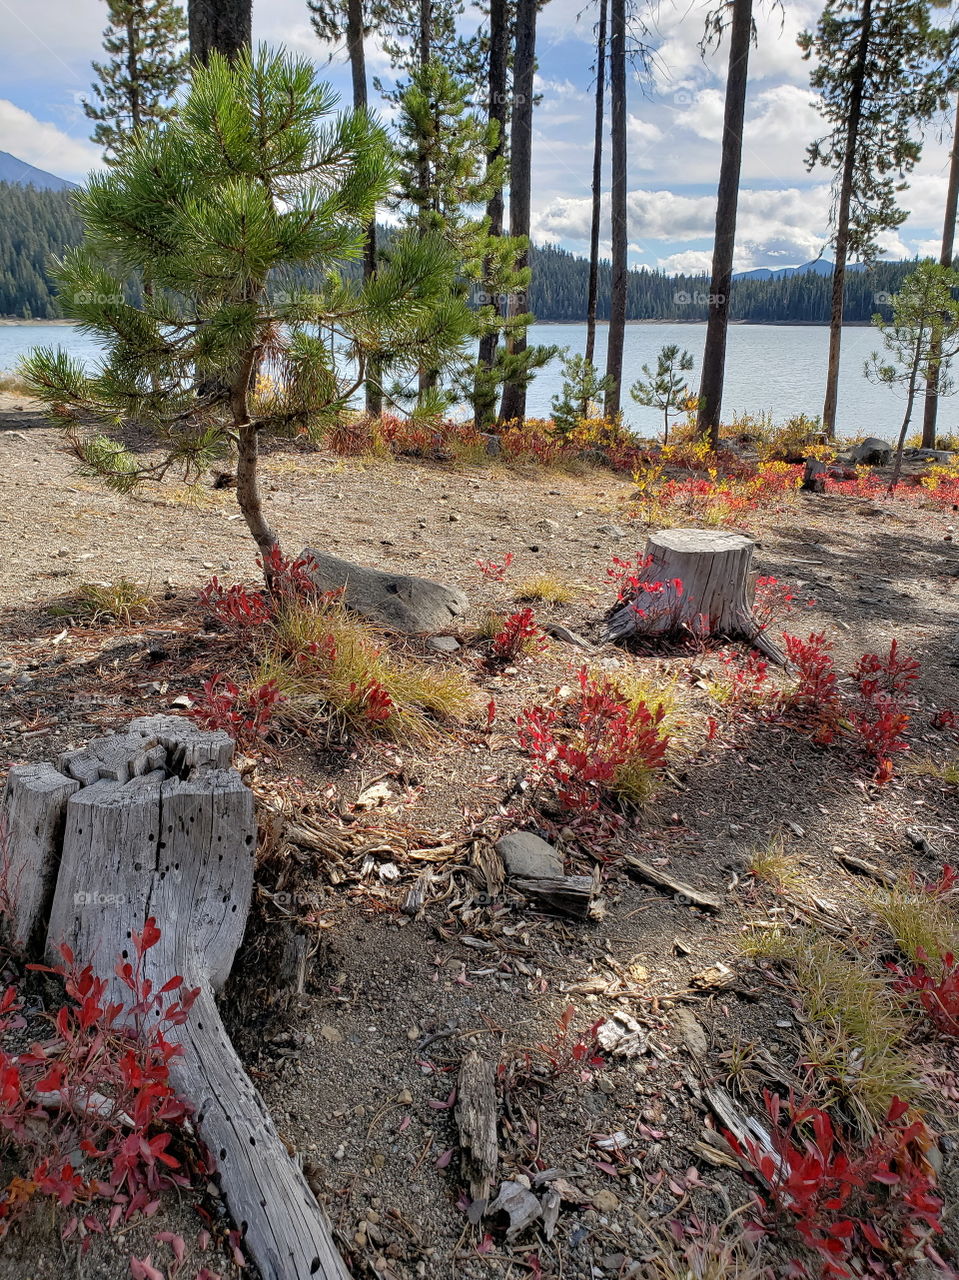 Brilliant fall colors of a landscape on the shores of Elk Lake in Oregon’s Cascade Mountains